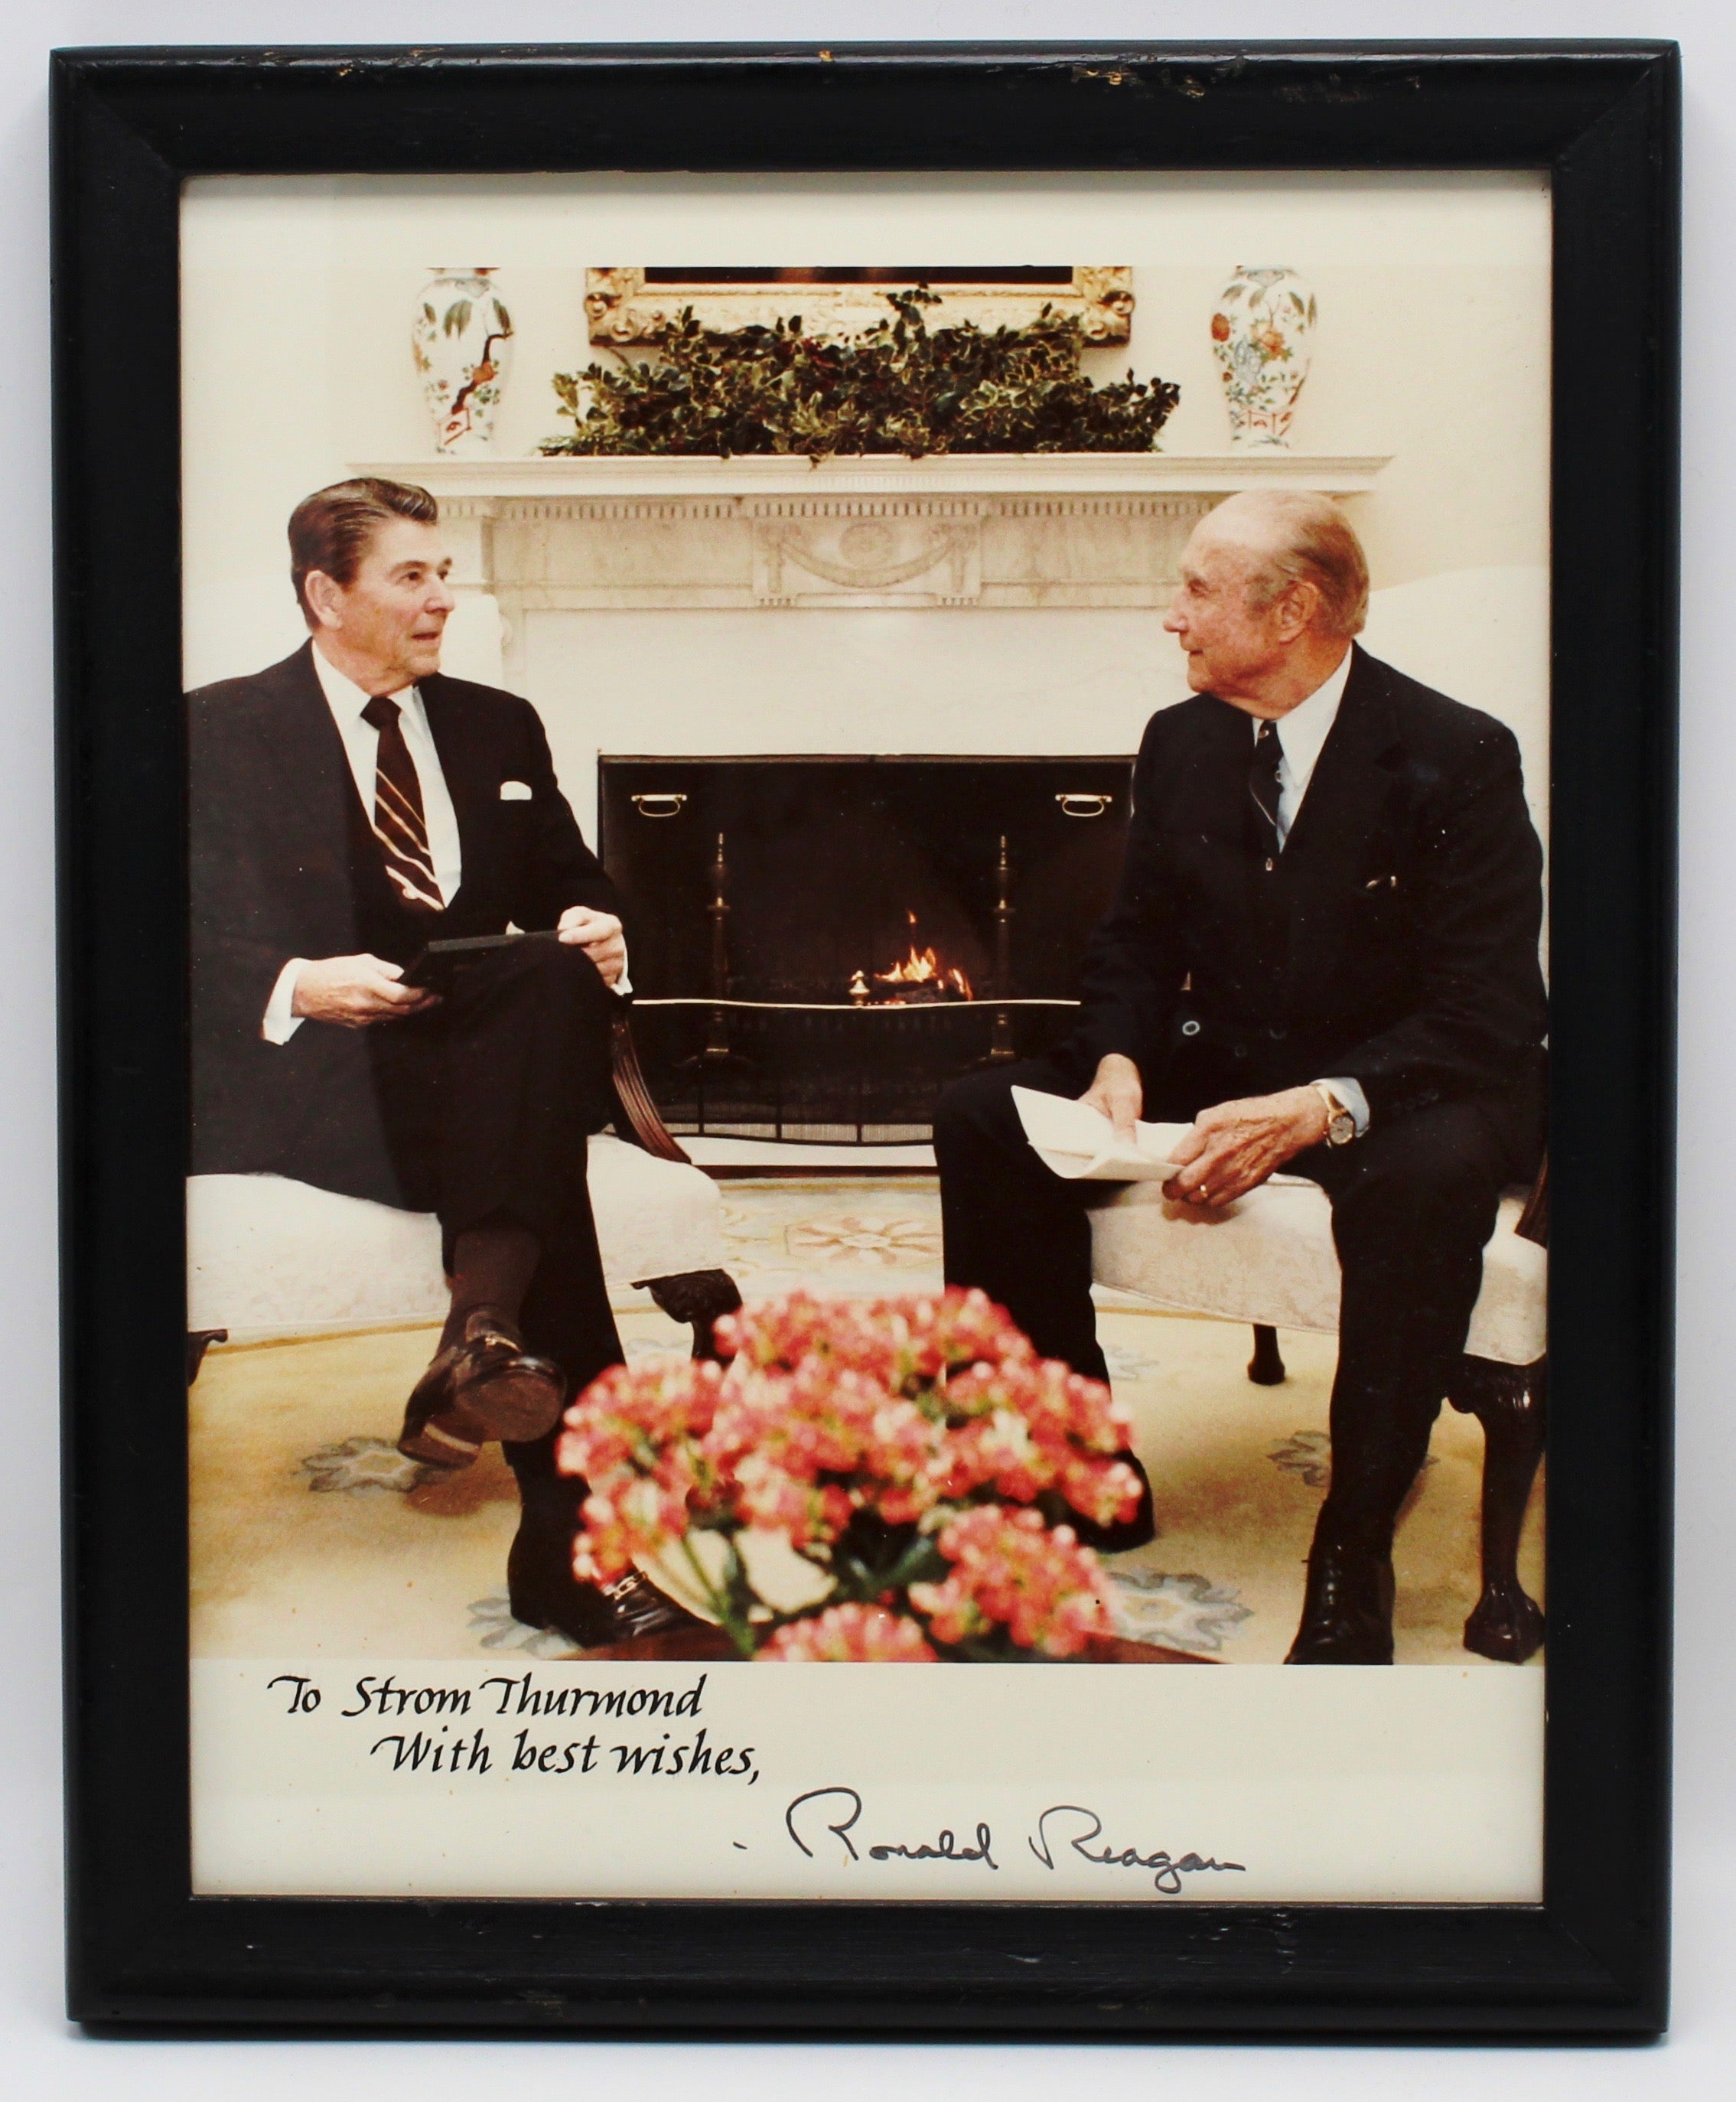 Ronald Reagan and Strom Thurmond at the White House, Signed by Reagan